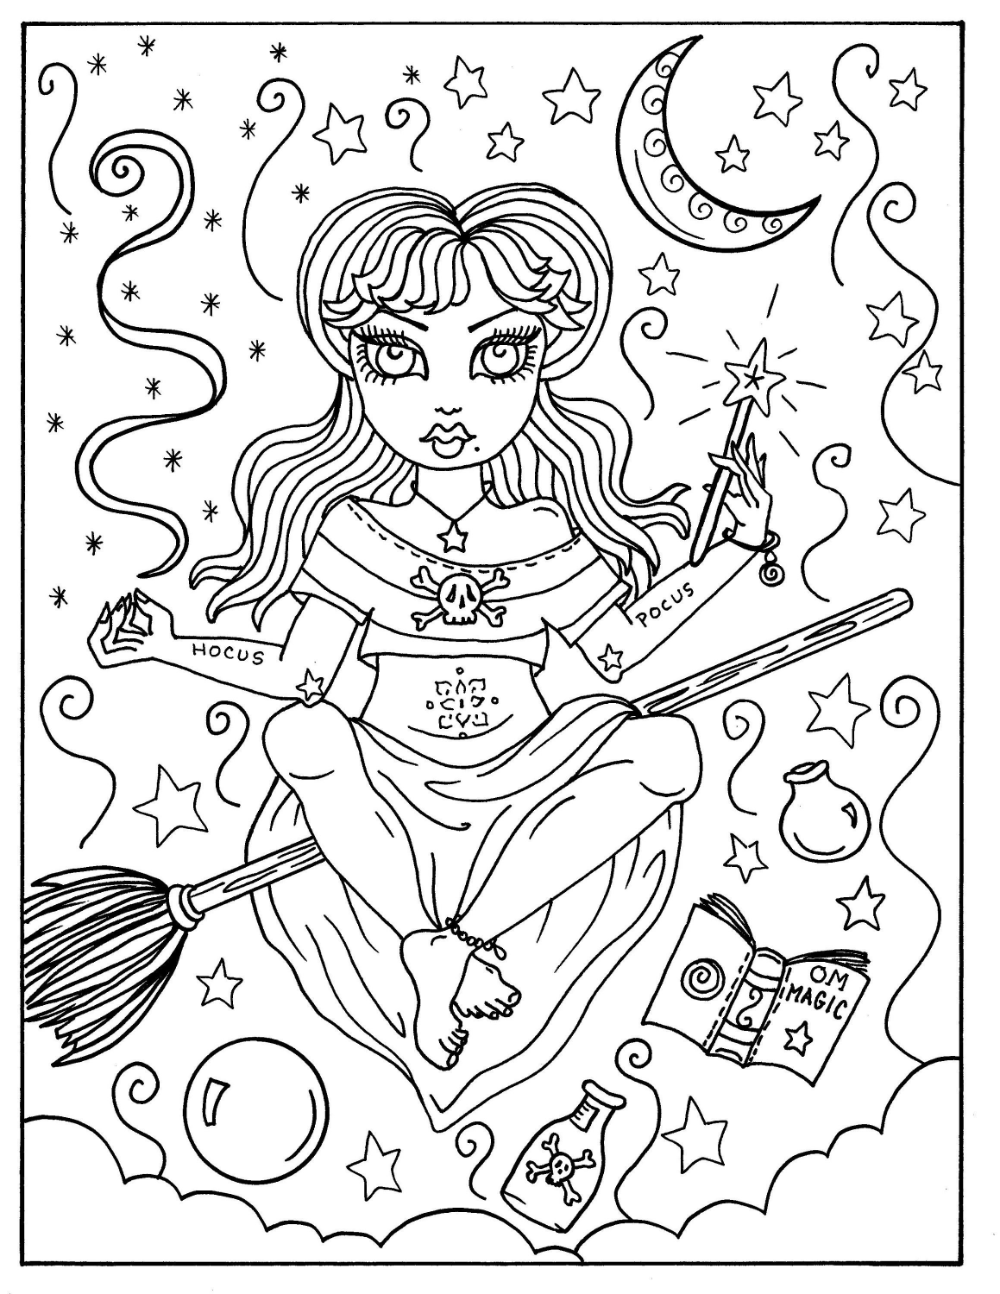 Hocus Pocus Witches Printable Coloring Pages For Adults, Halloween ...